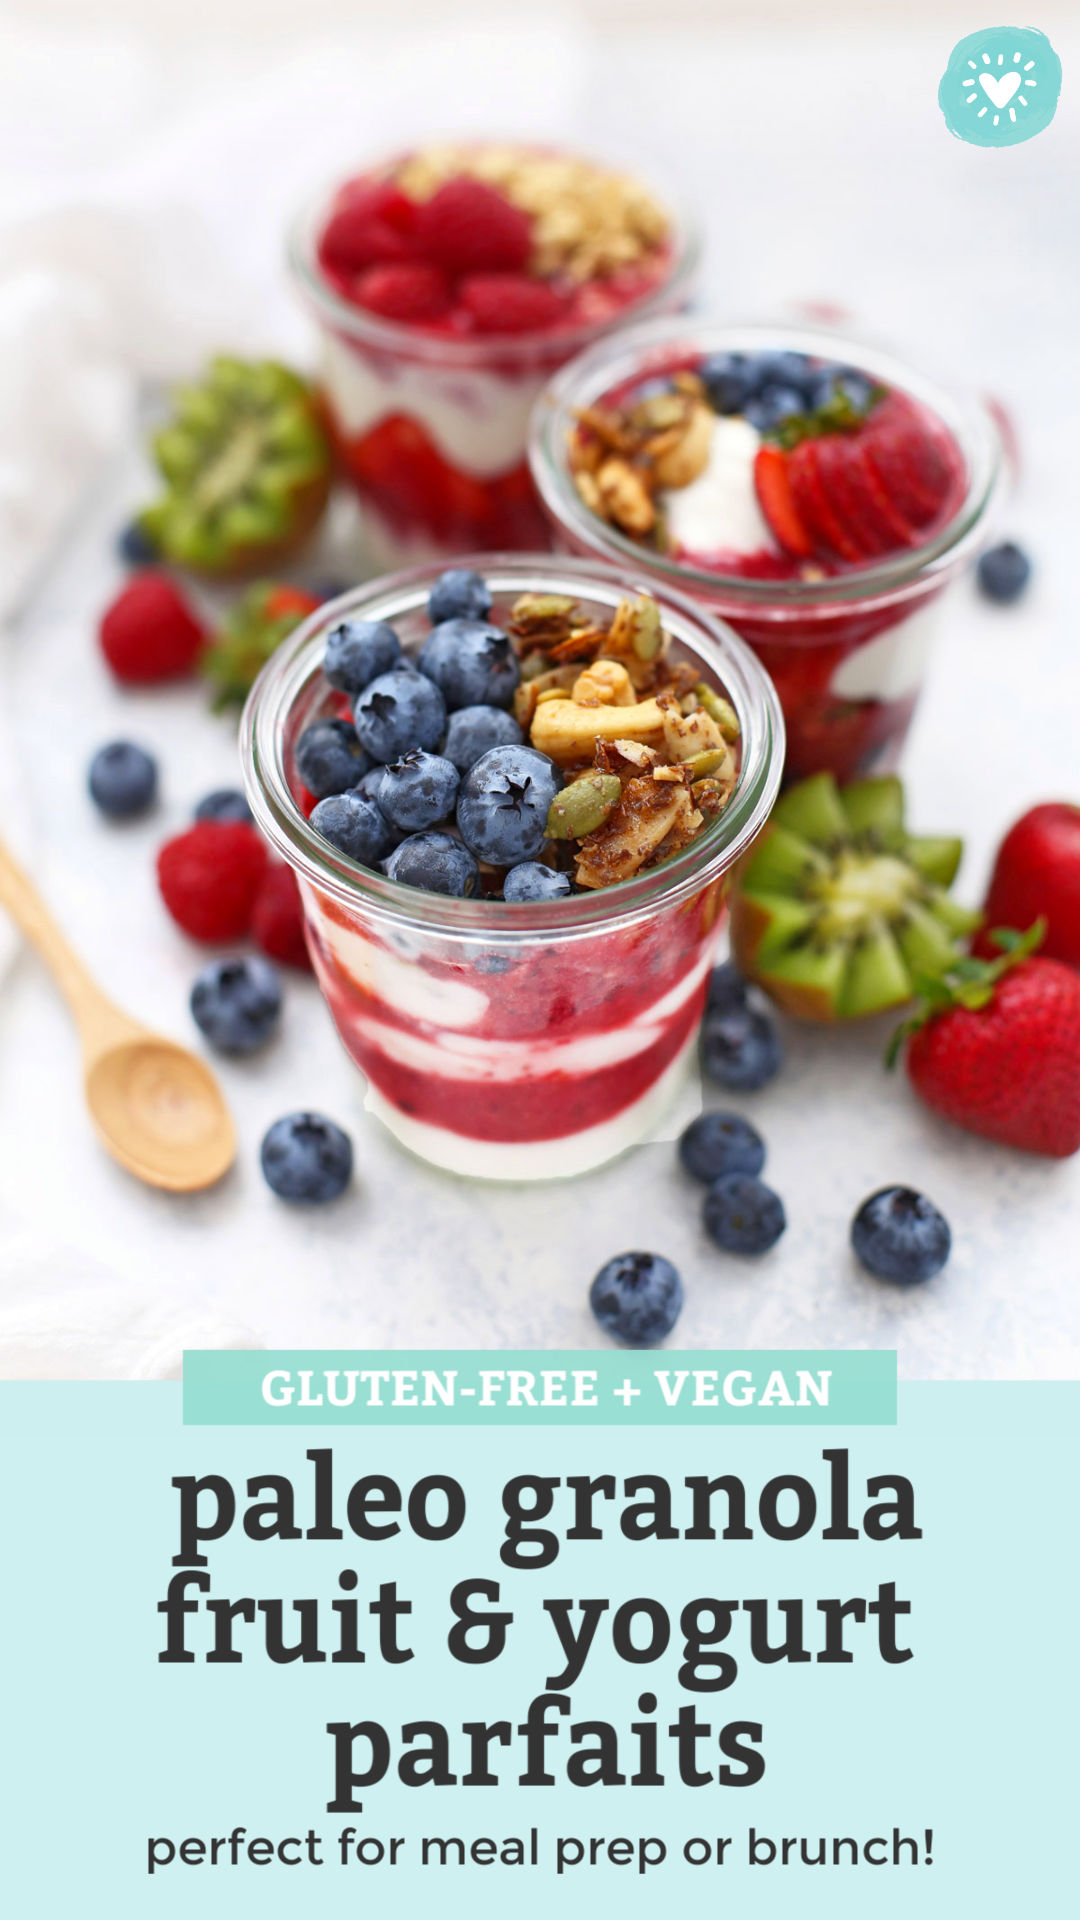 Front view of jars of paleo granola parfait with fresh fruit, yogurt, and berry puree with text overlay that reads "Gluten-Free + Vegan Paleo Granola Fruit & Yogurt Parfaits--Perfect for meal prep or brunch!"